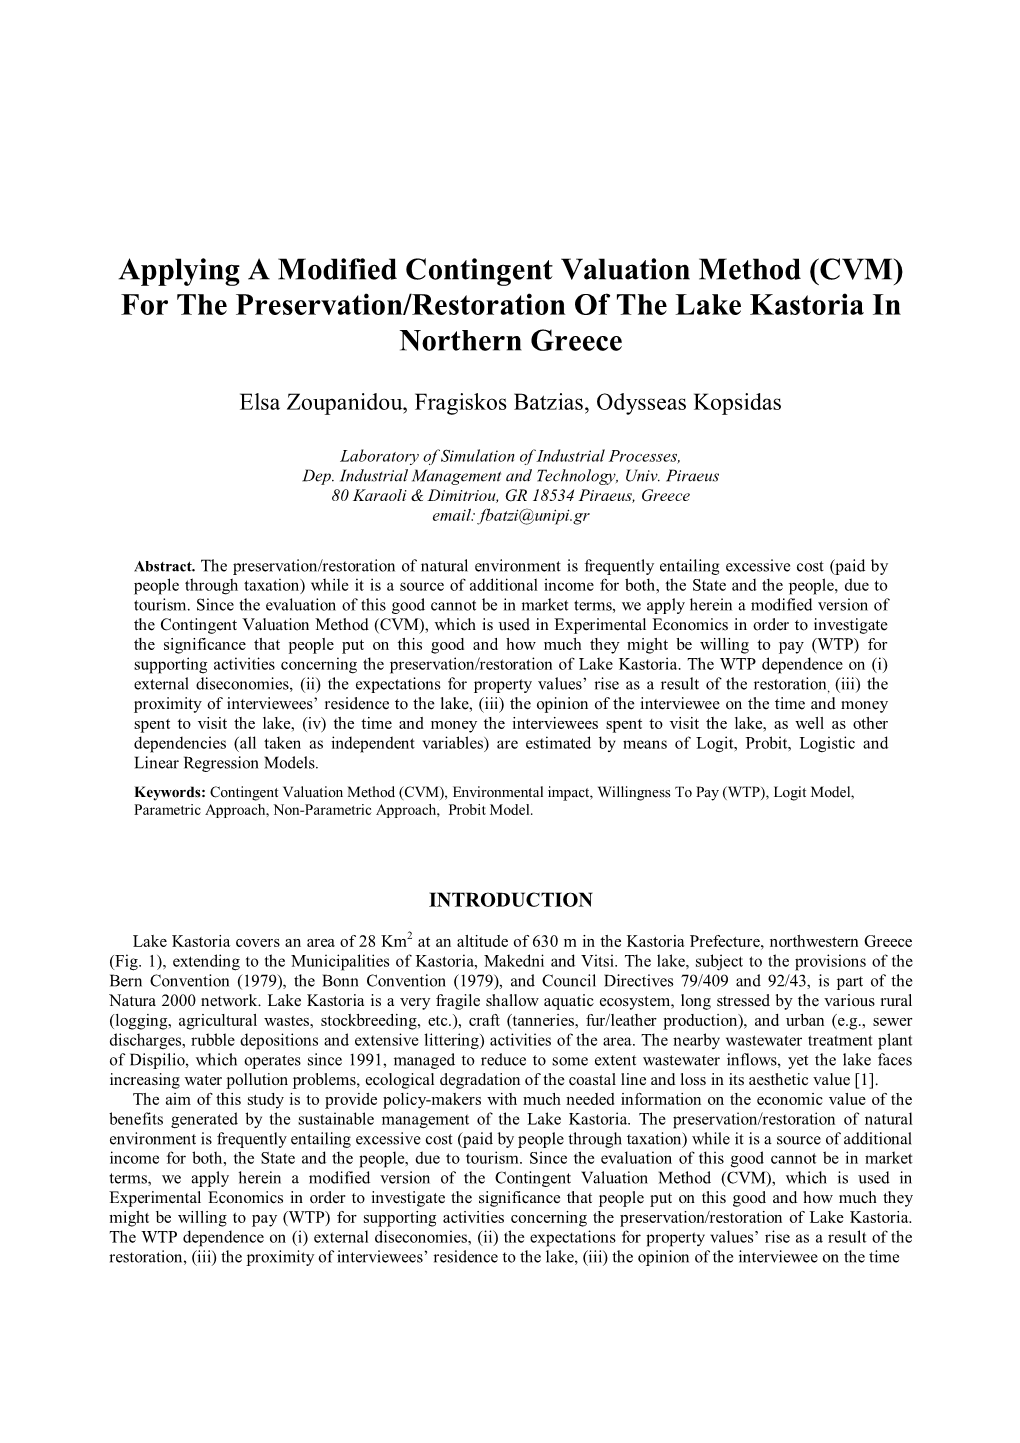 Applying a Modified Contingent Valuation Method (CVM) for the Preservation/Restoration of the Lake Kastoria in Northern Greece